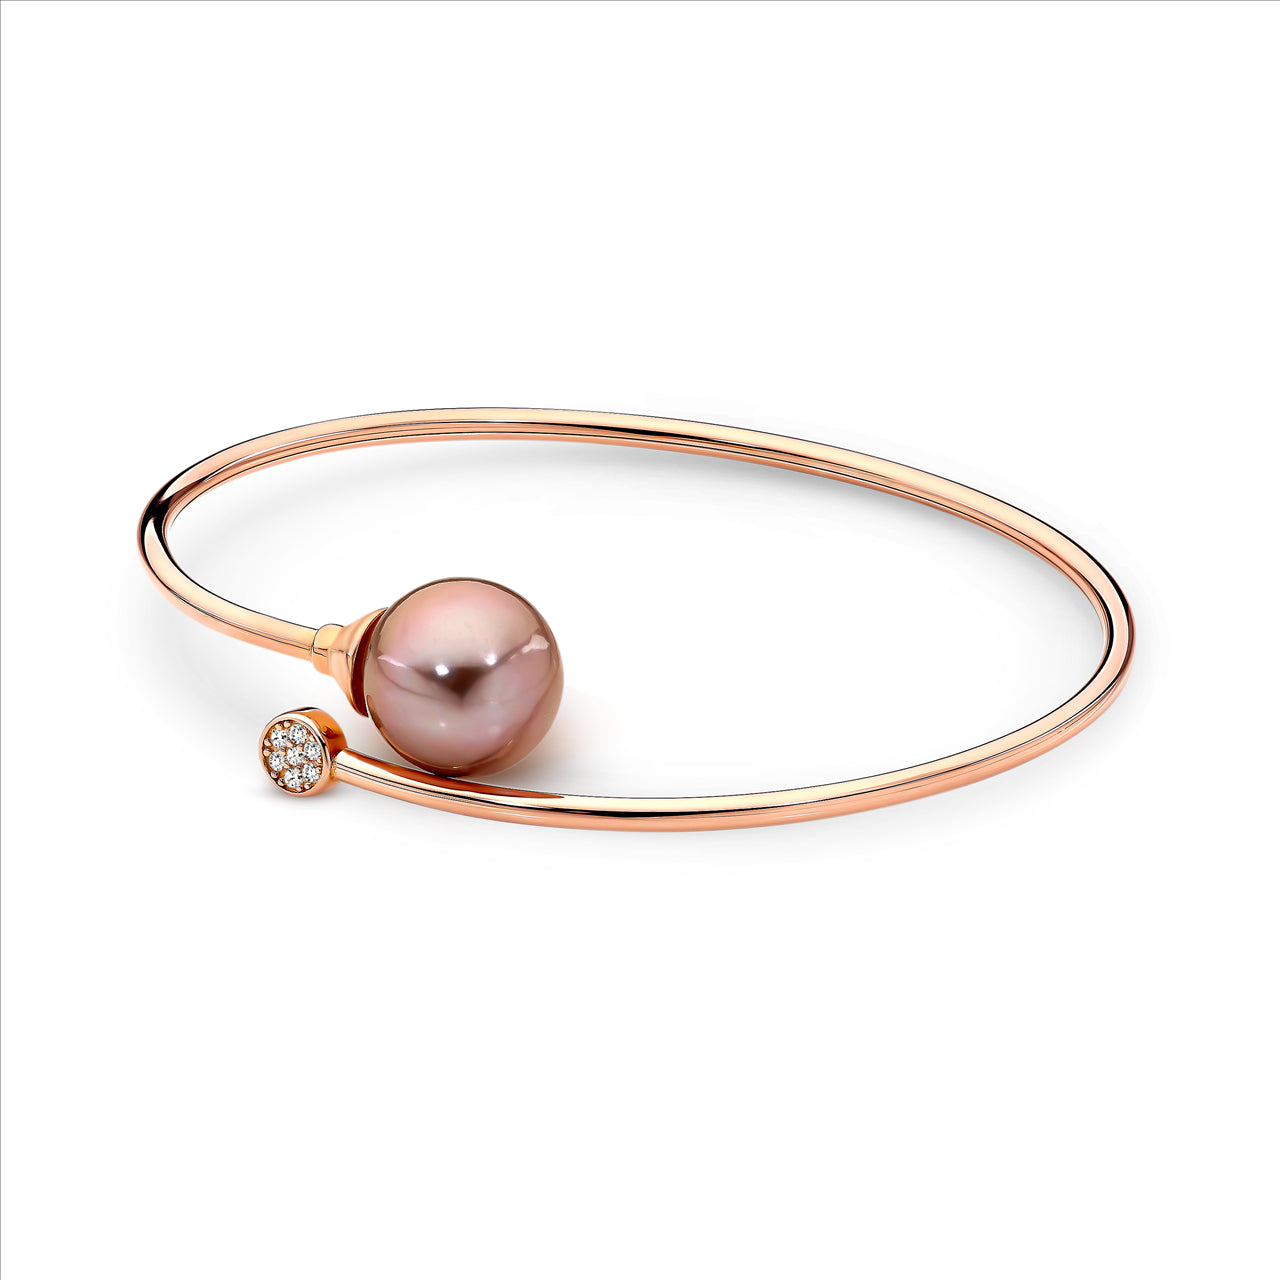 The Starry Night Pink Pearl Bangle